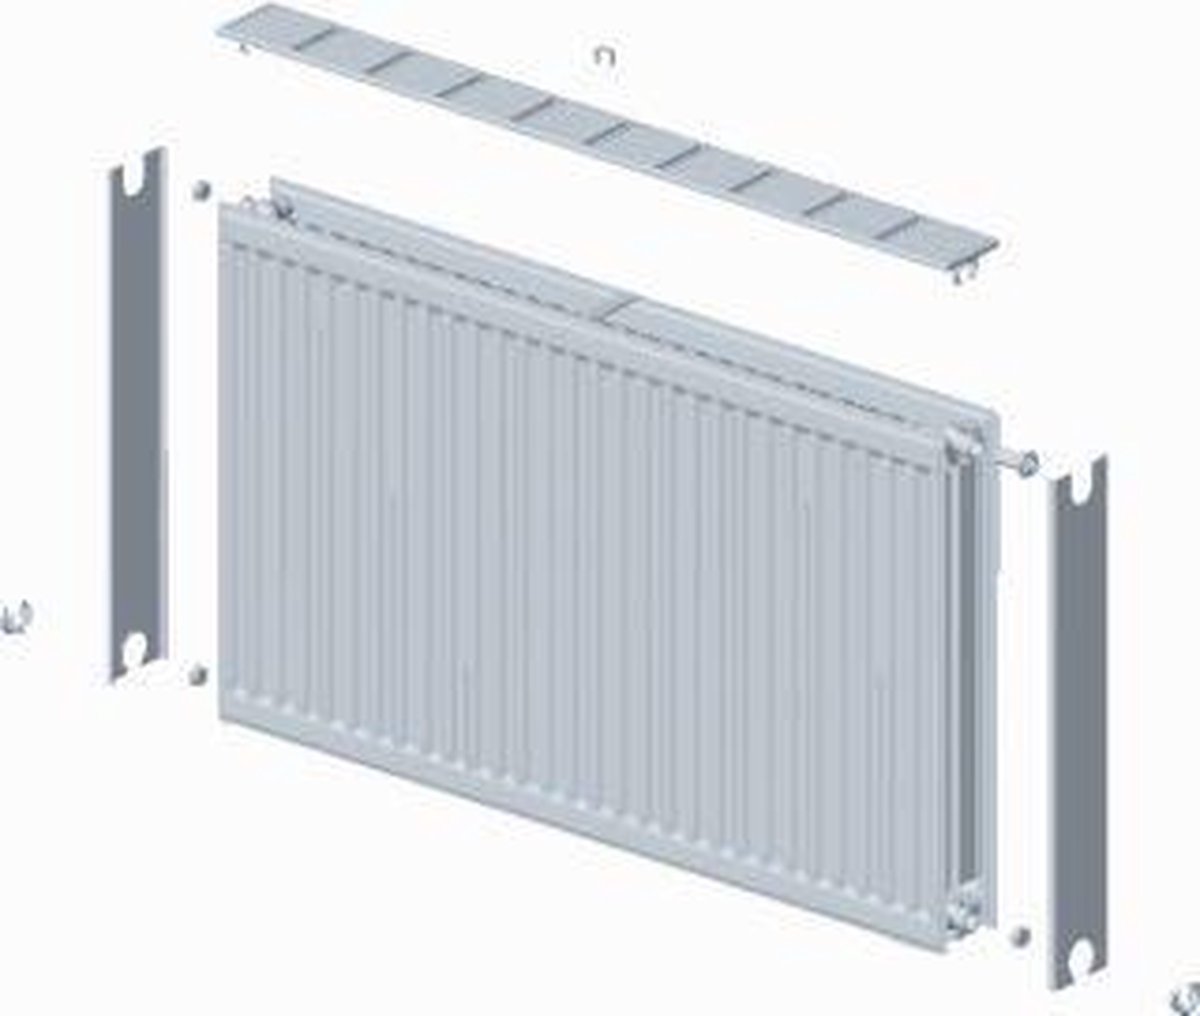 Stelrad paneelradiator Novello, staal, wit, (hxlxd) 300x1200x100mm, 22